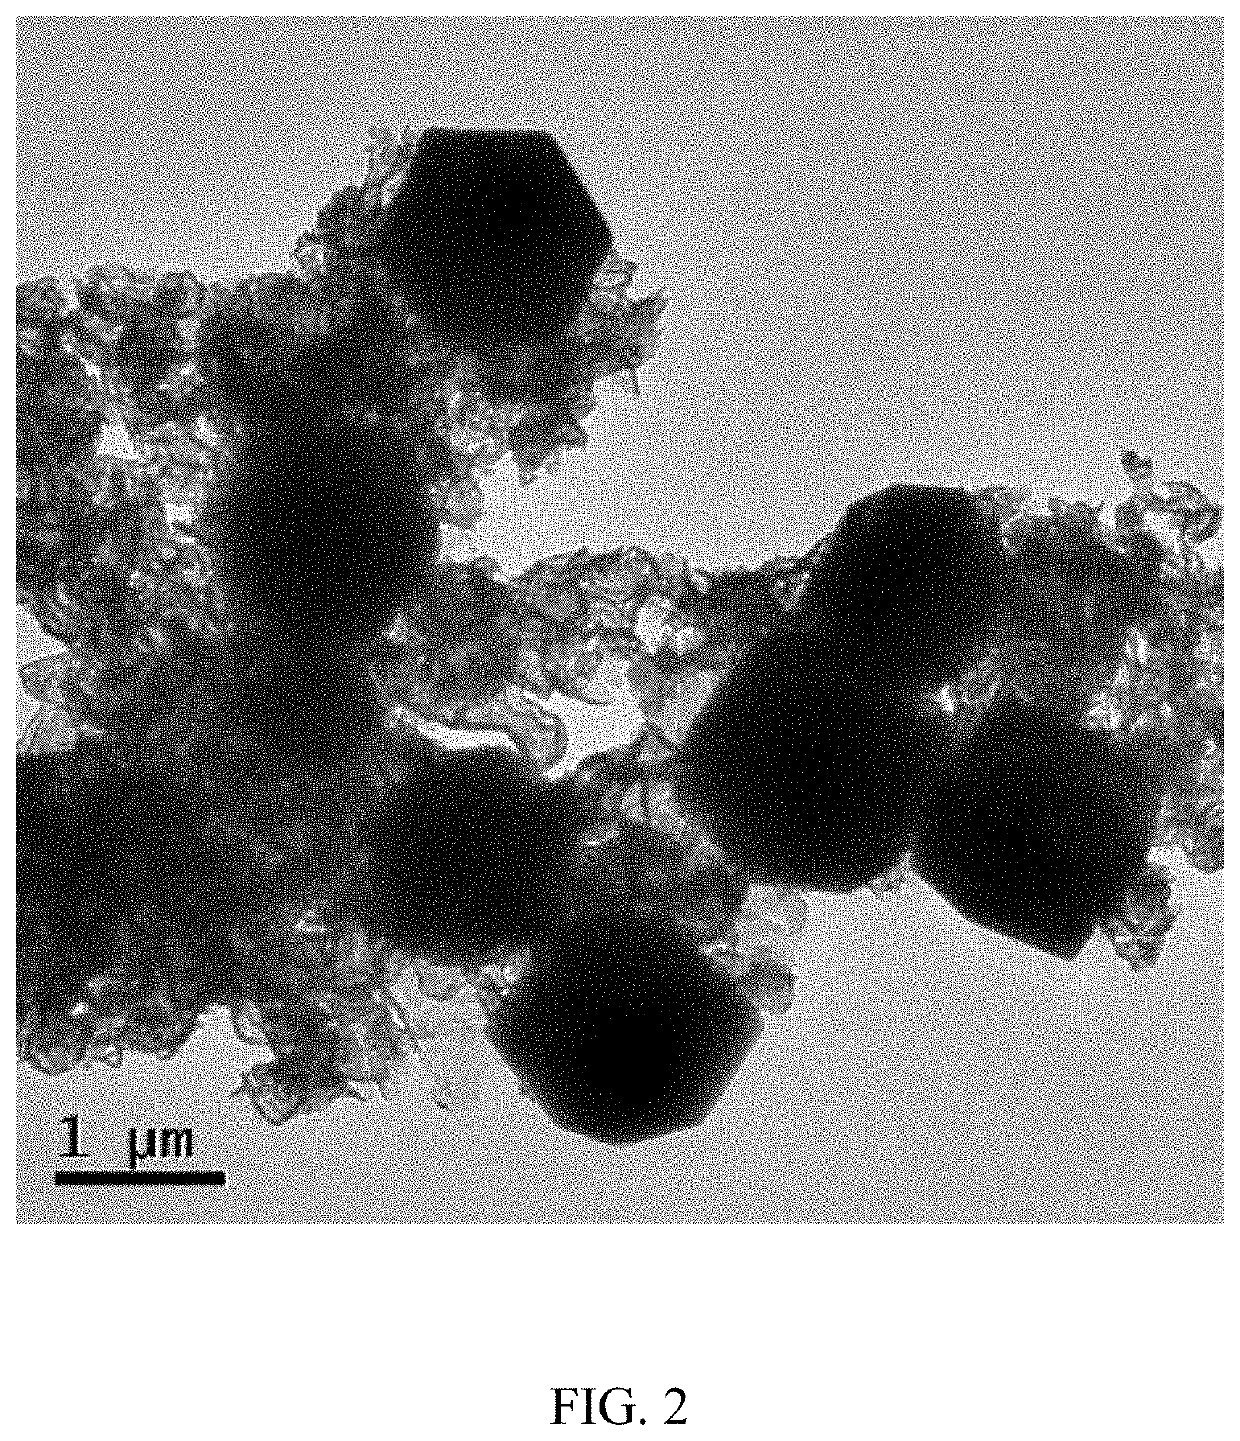 Tricobalt tetraoxide dodecahedron / carbon nitride nanosheet composite and application thereof in exhaust gas treatment